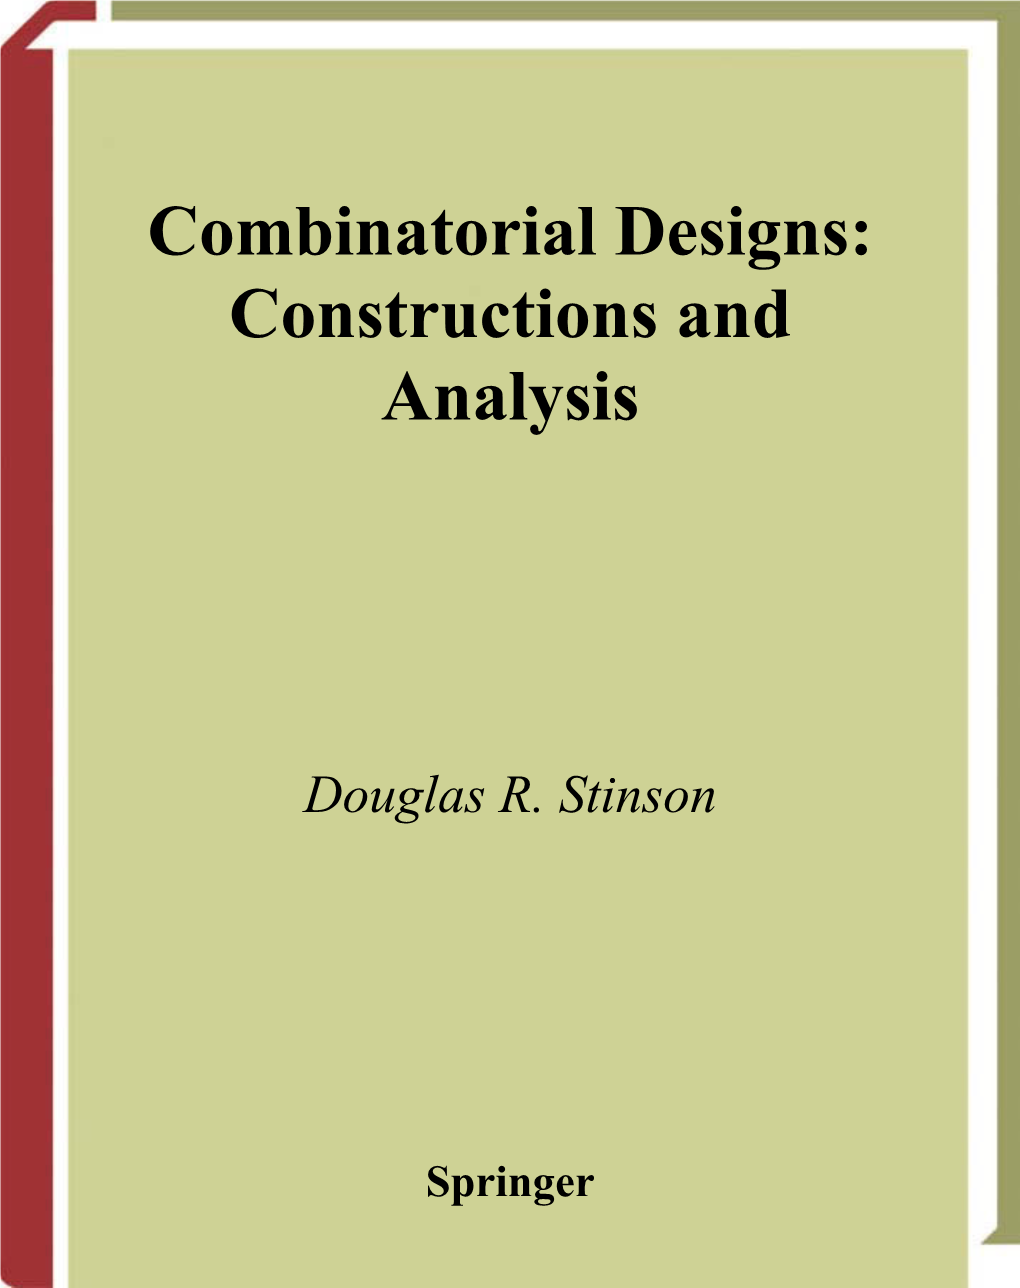 Combinatorial Designs: Constructions and Analysis